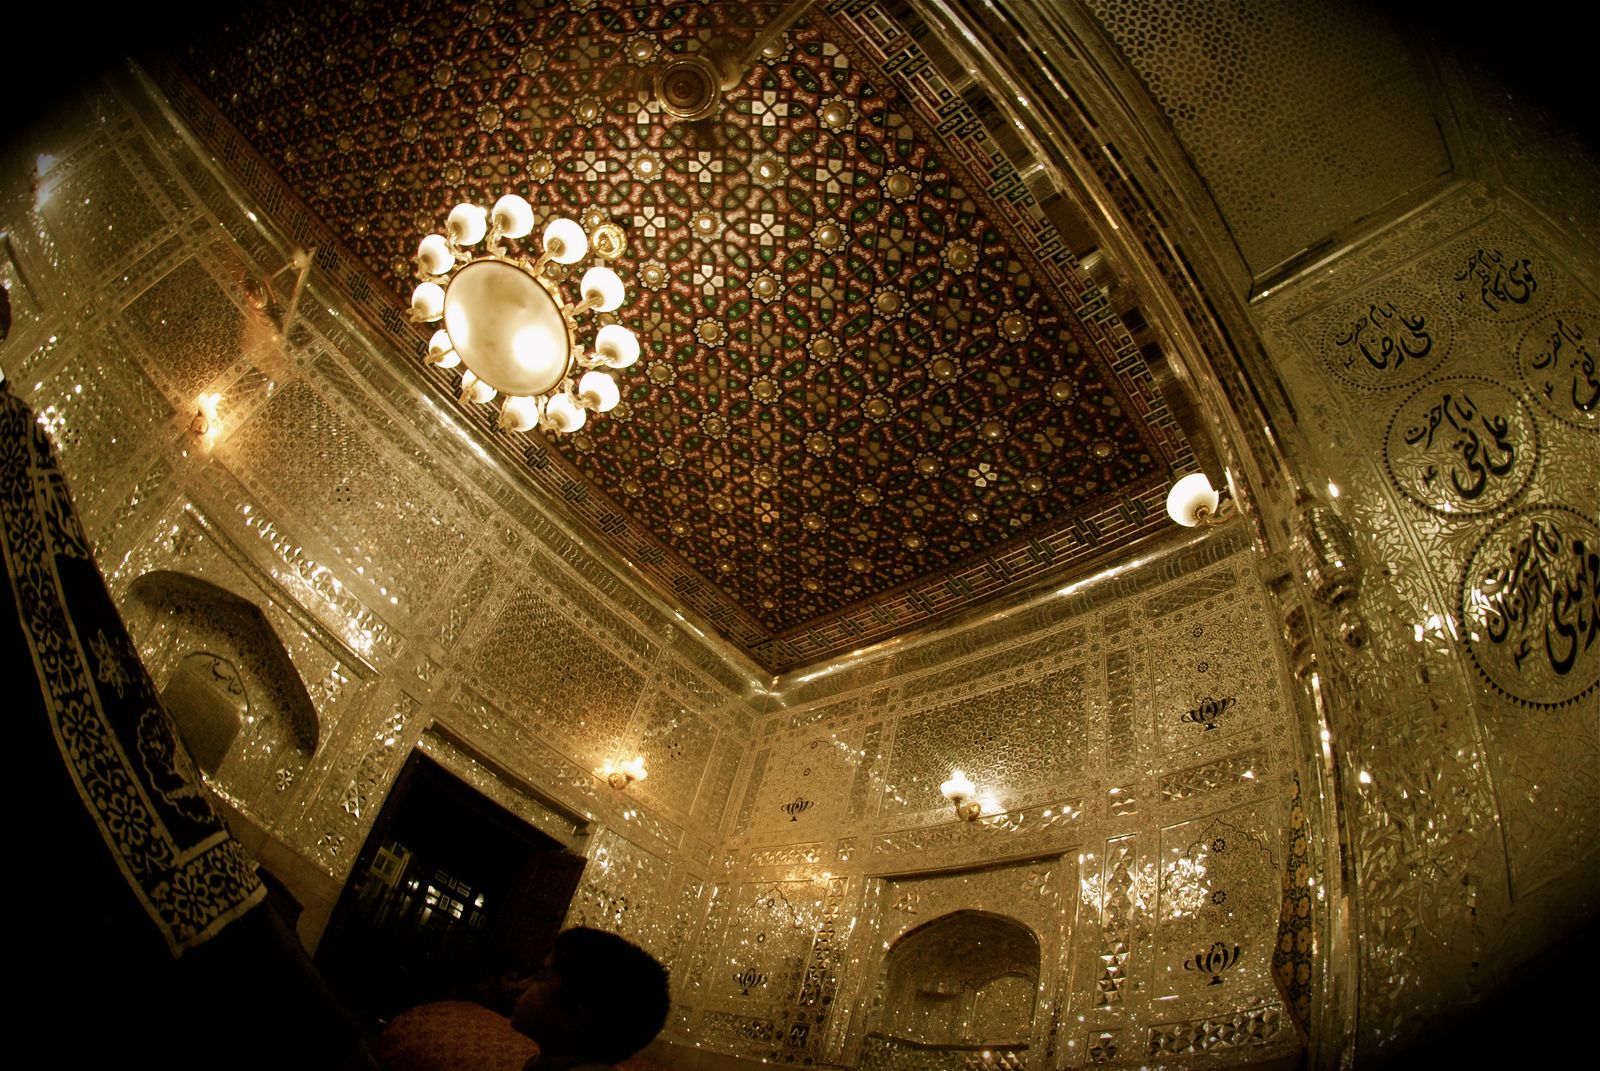 © Nazia Akram - Image from the Spiritual Transcendence - Sufism in Pakistan photography project